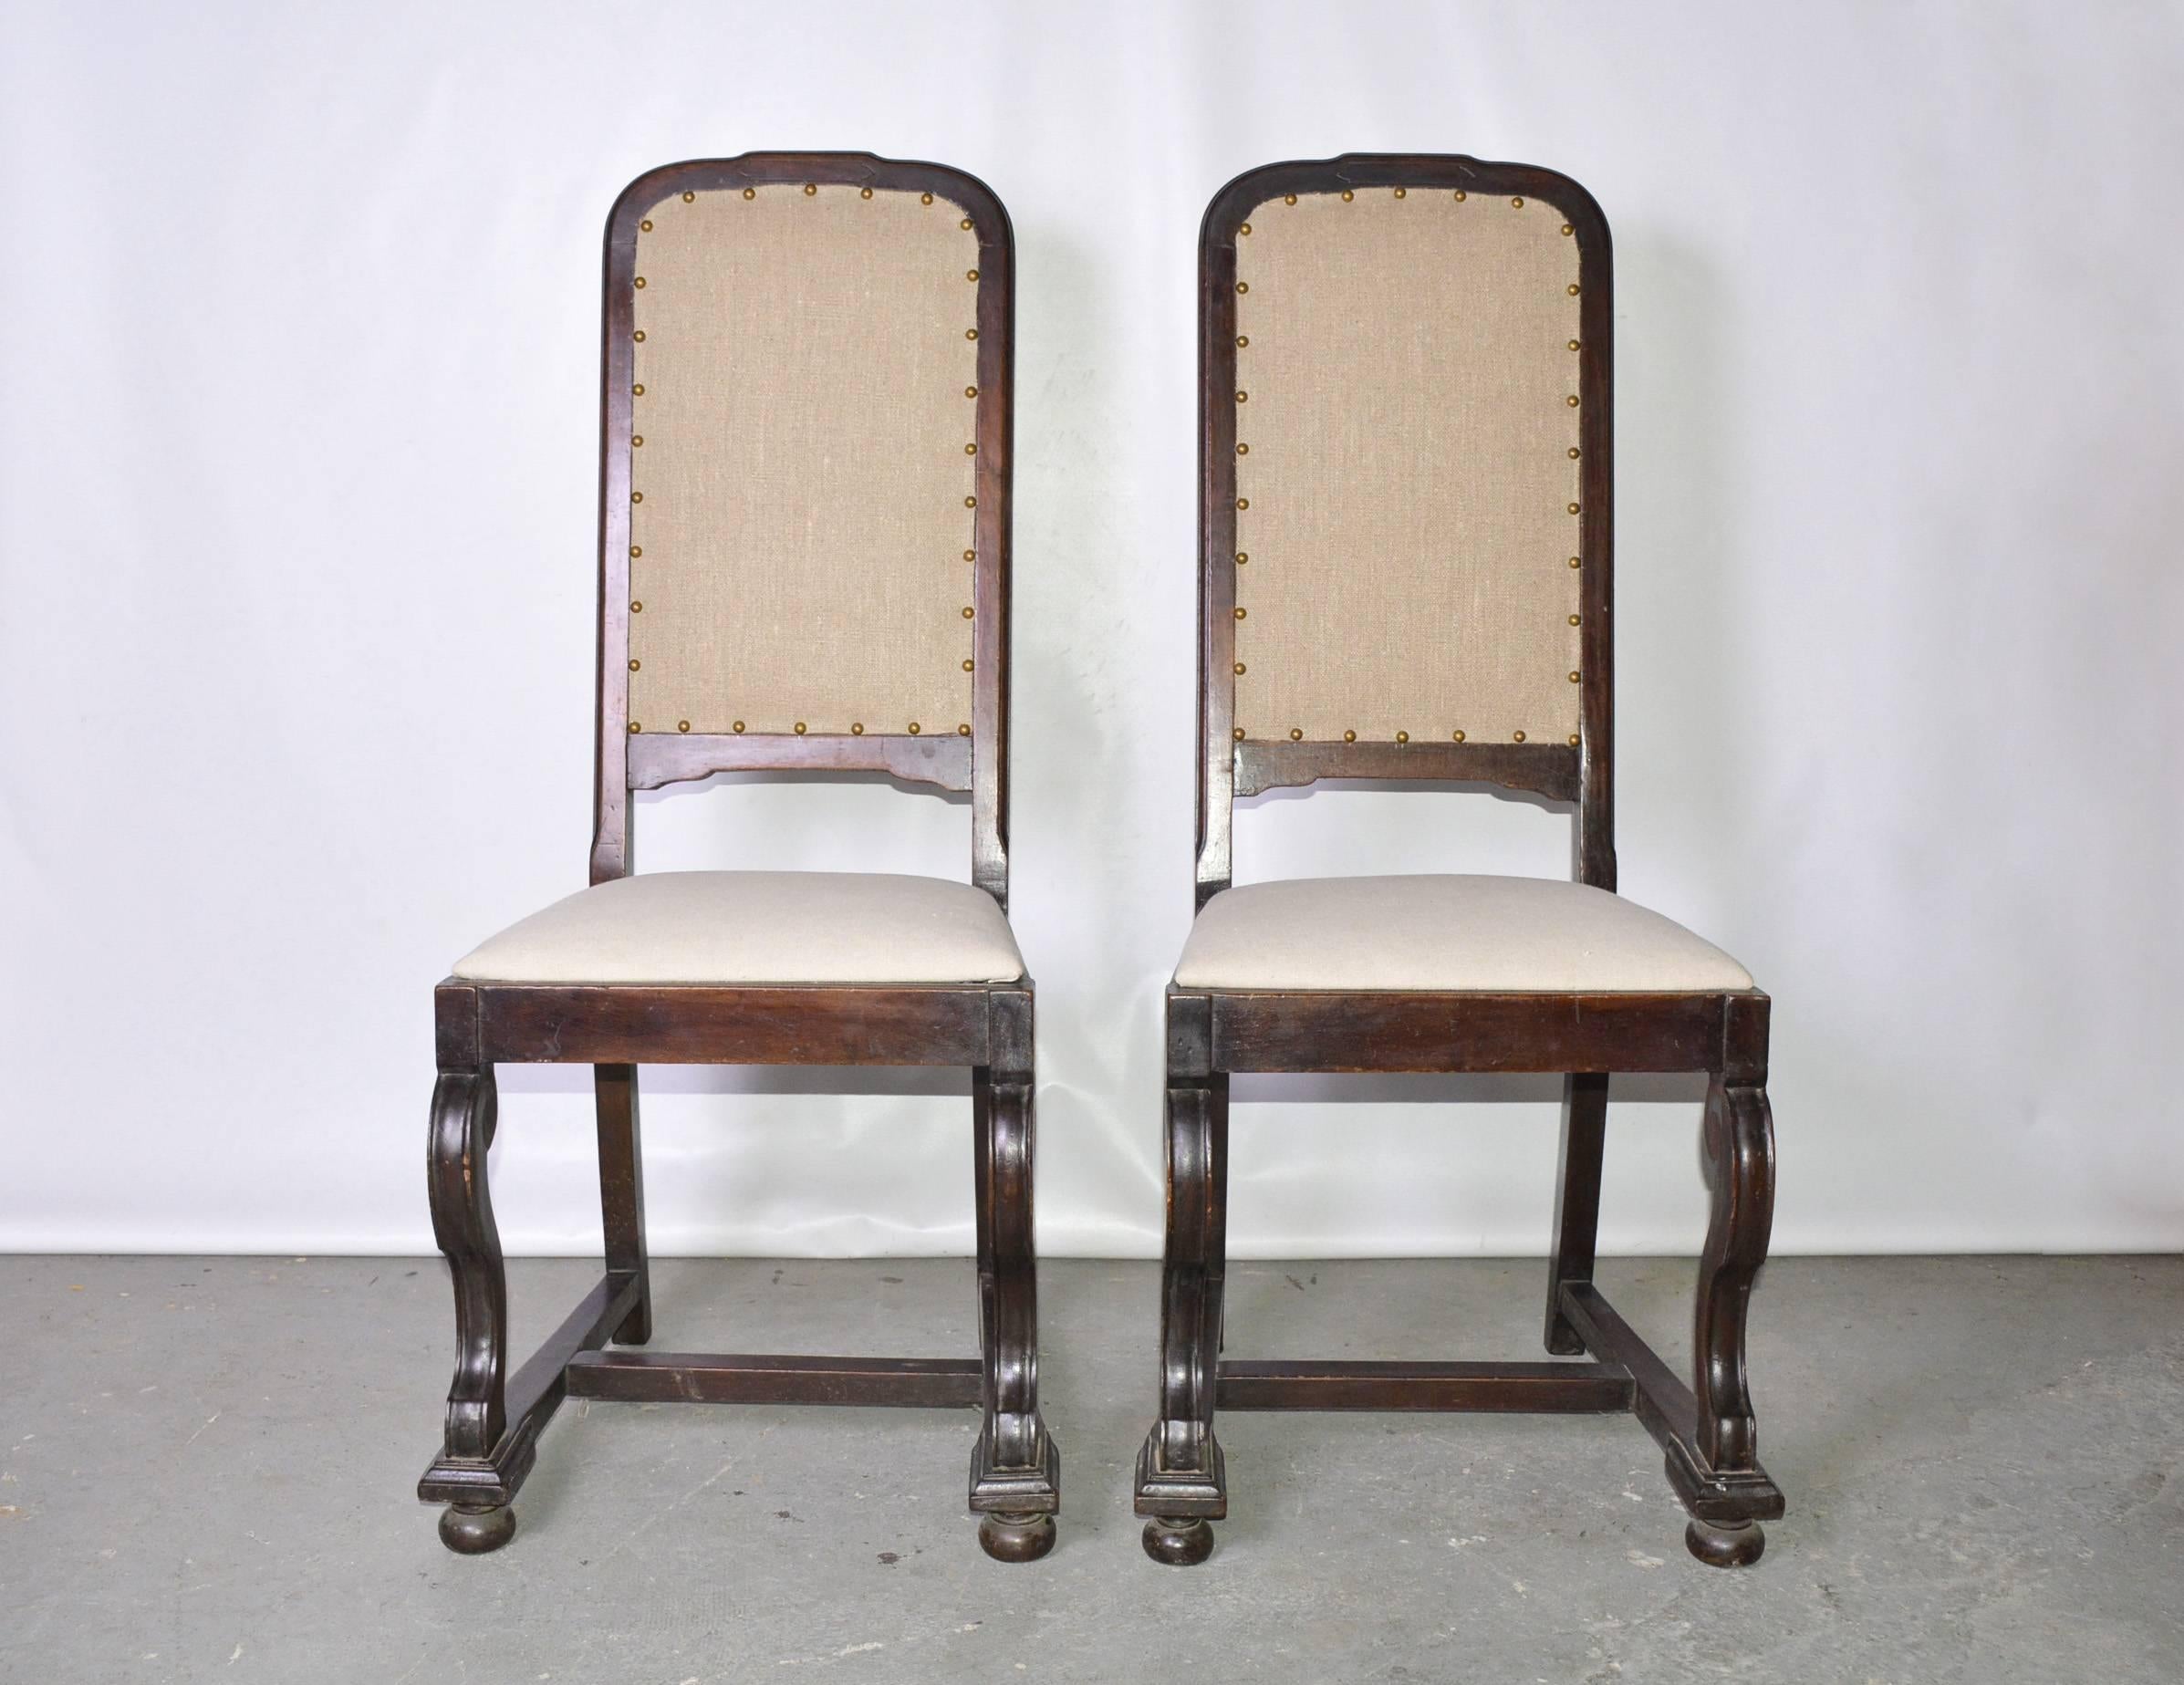 The pair of antique Jacobean-style side mahogany chairs are newly upholstered in one shade of beige linen while the seats are covered in another complementary shade of beige linen.